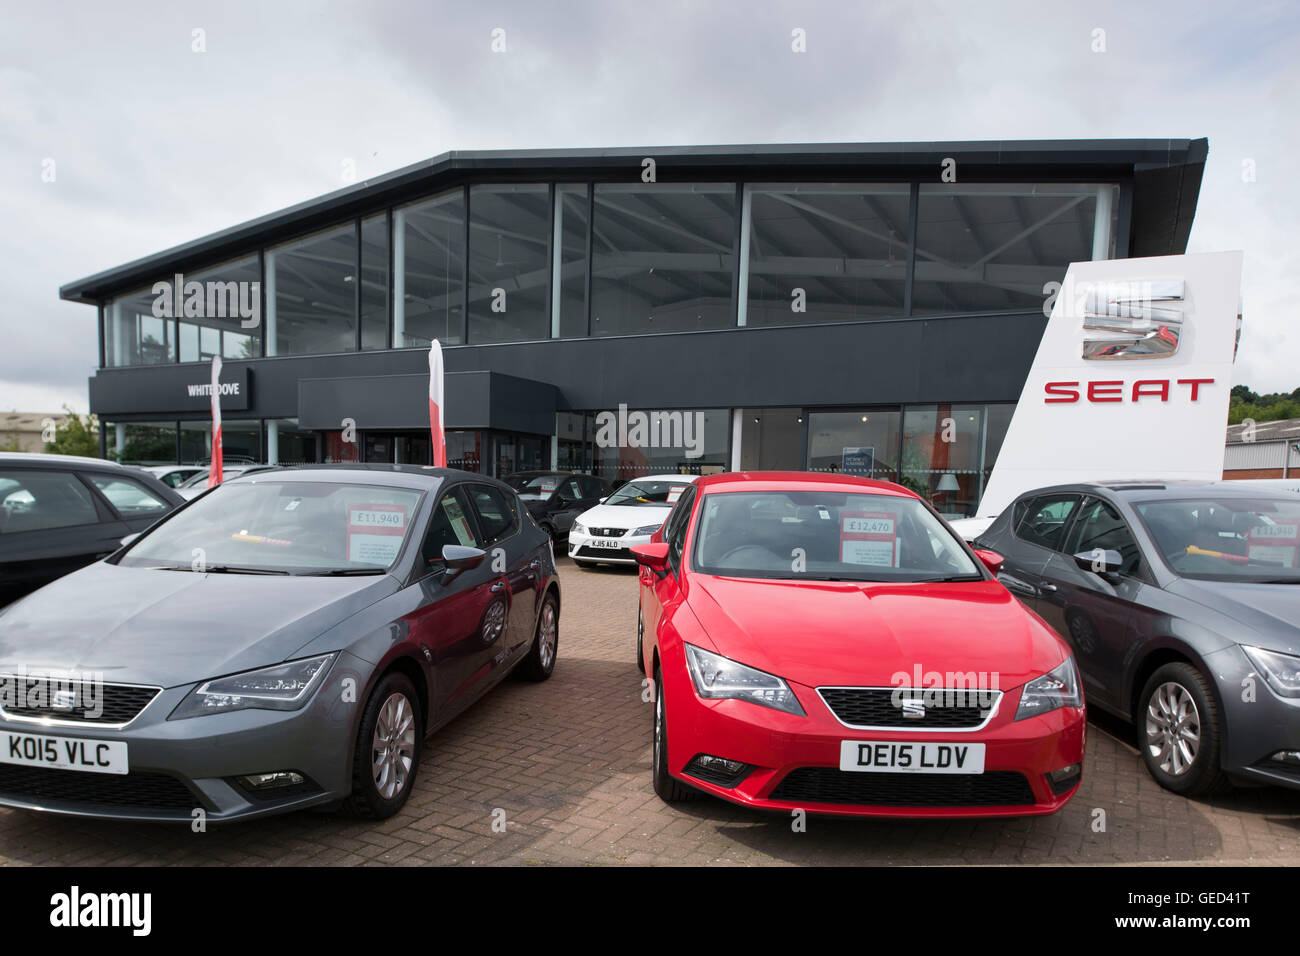 SEAT car garage showroom and forecourt. Stock Photo